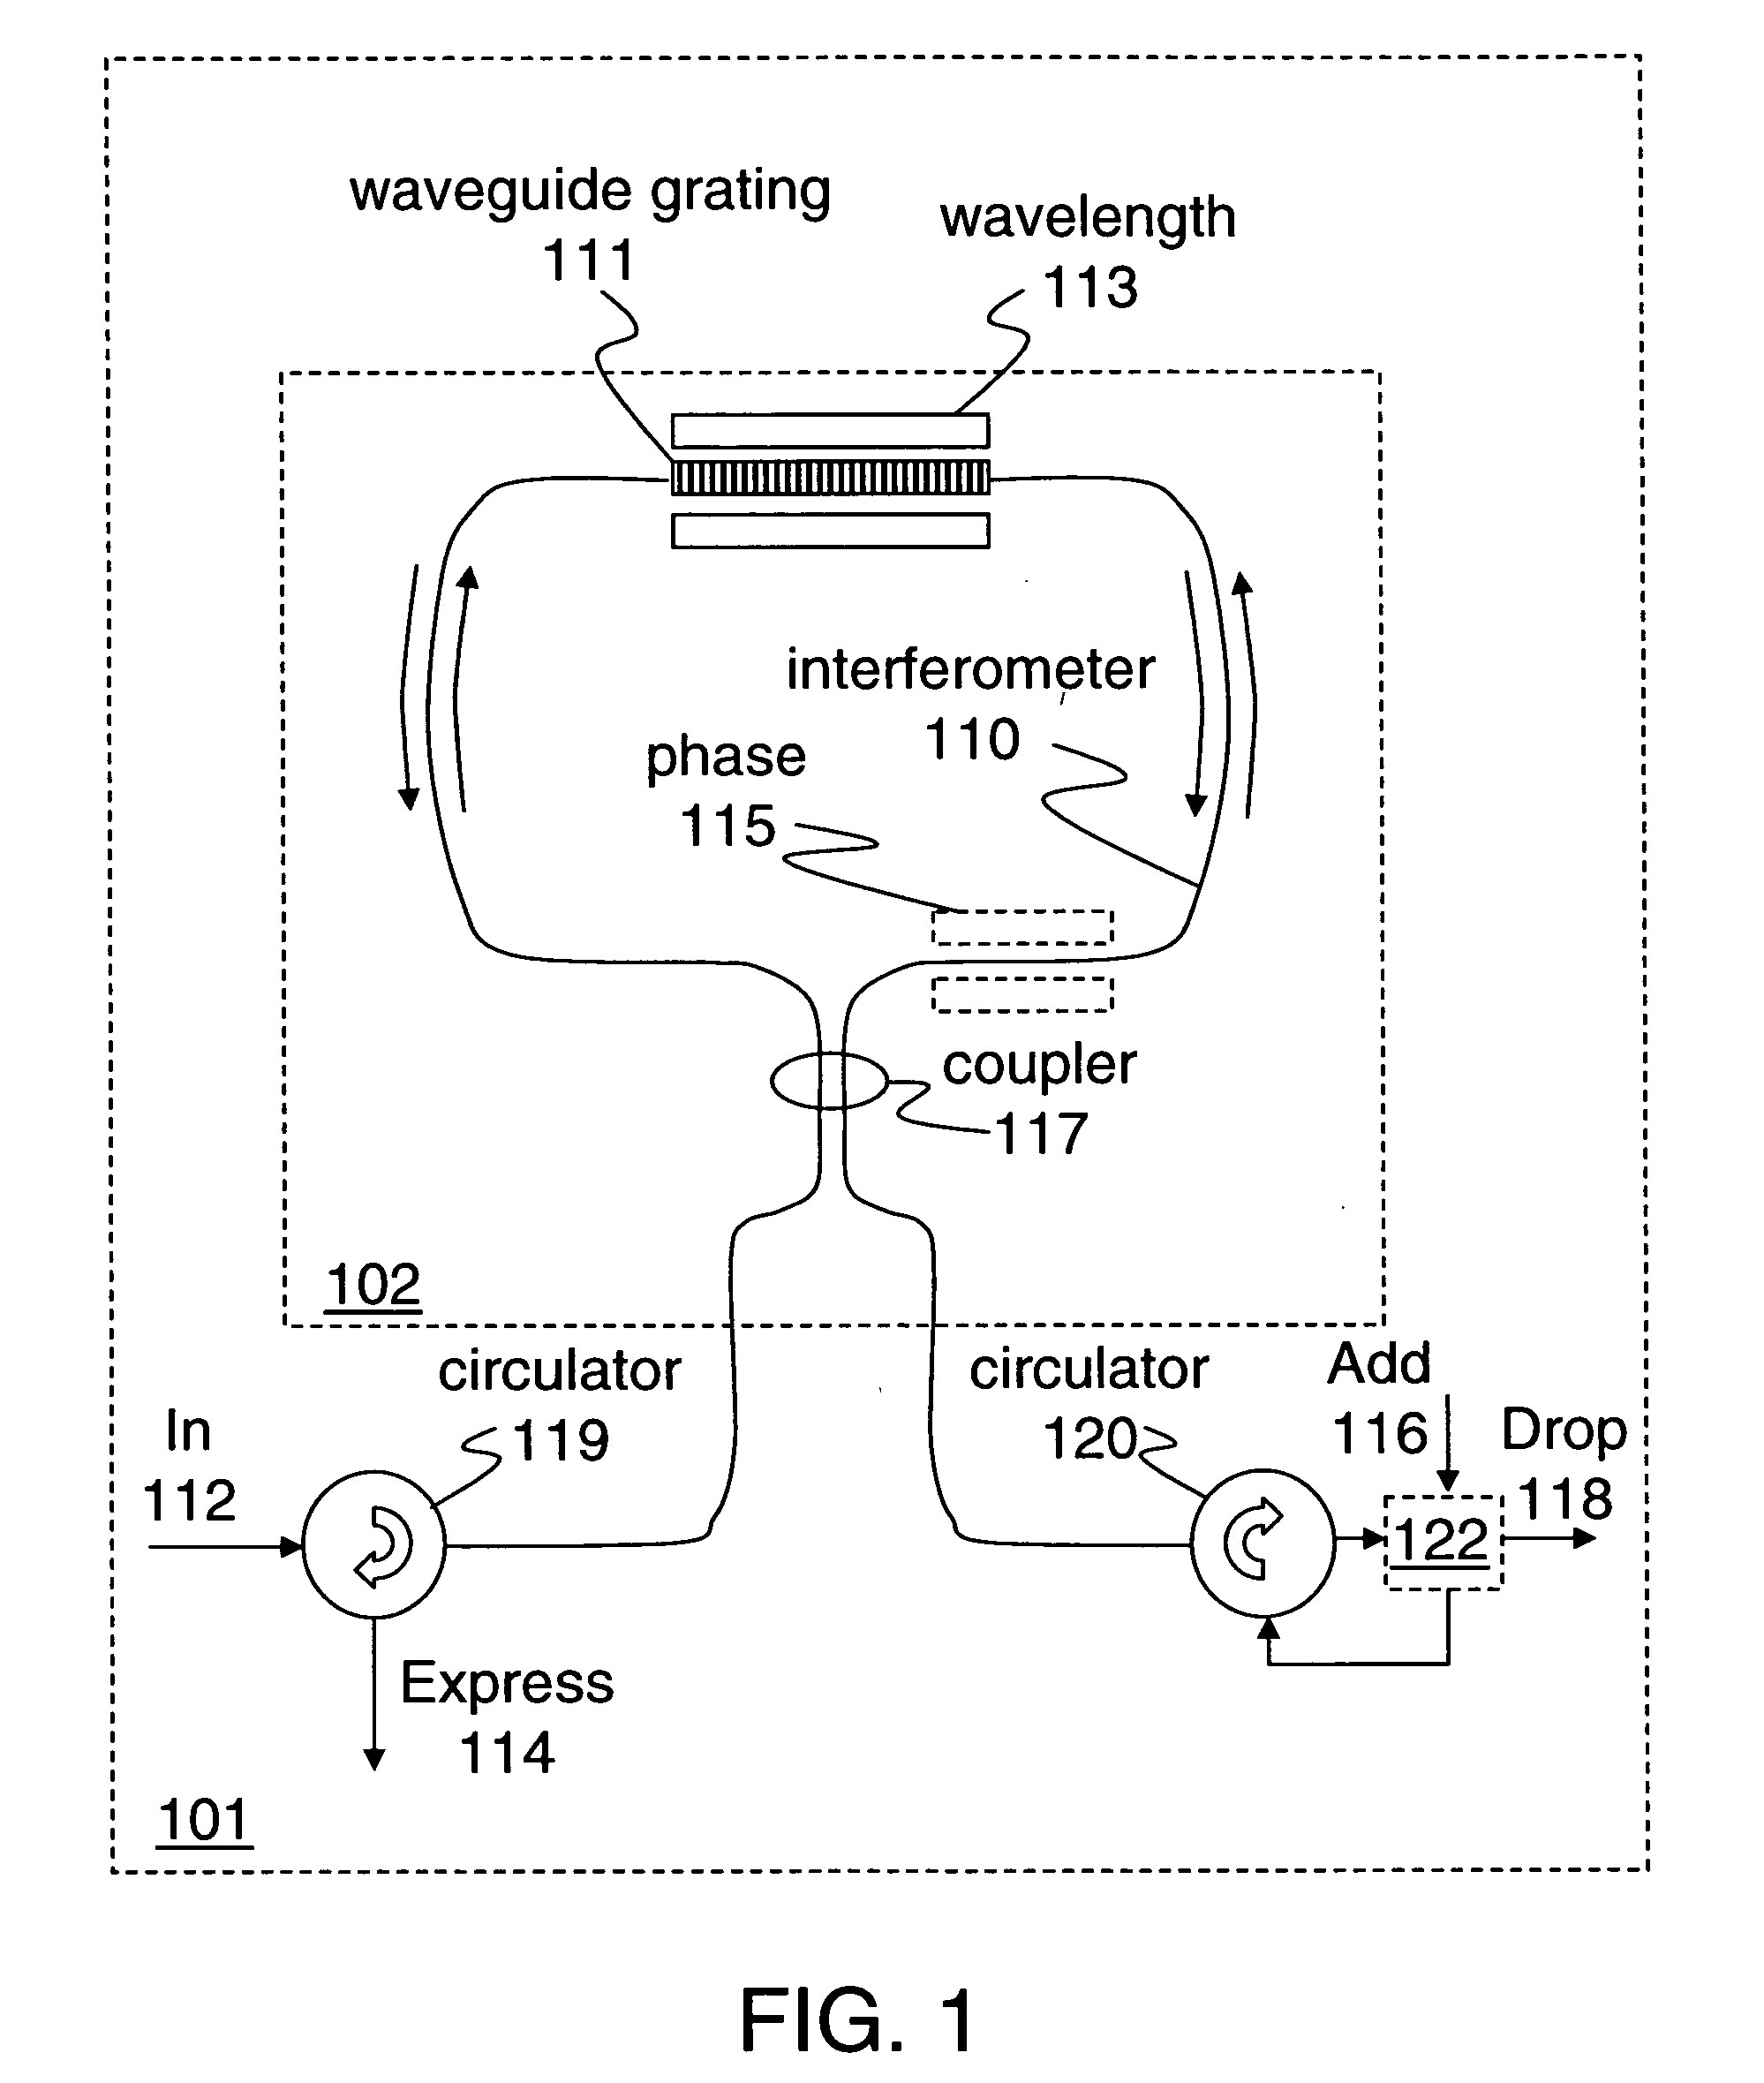 Hitless variable-reflective tunable optical filter